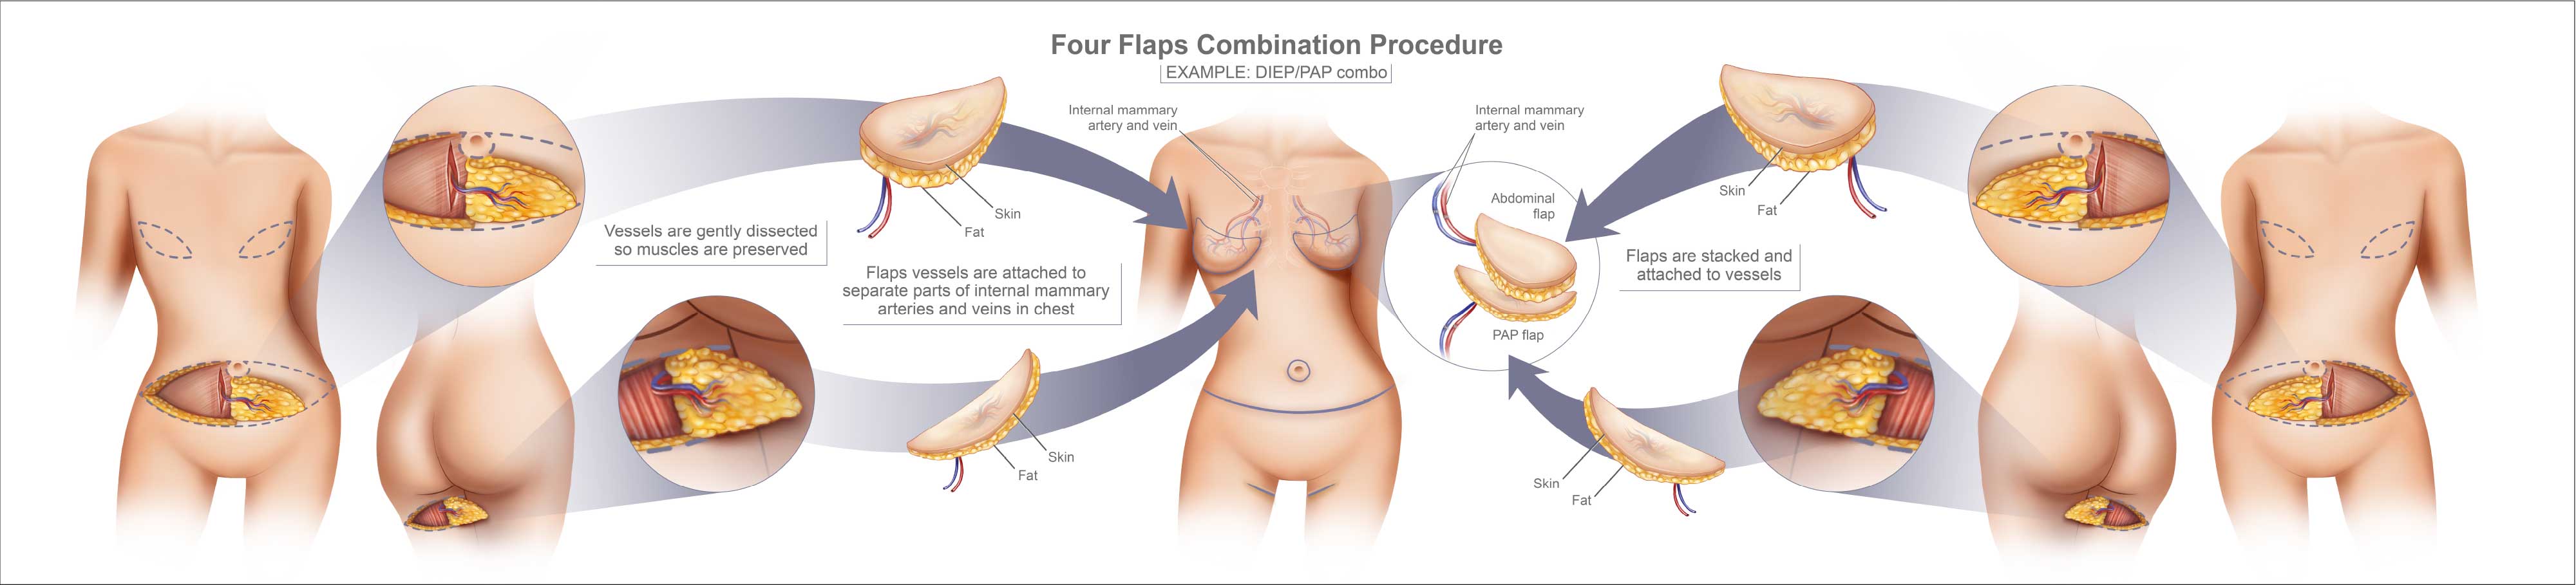 Illustration of Combo Flap Breast Reconstruction